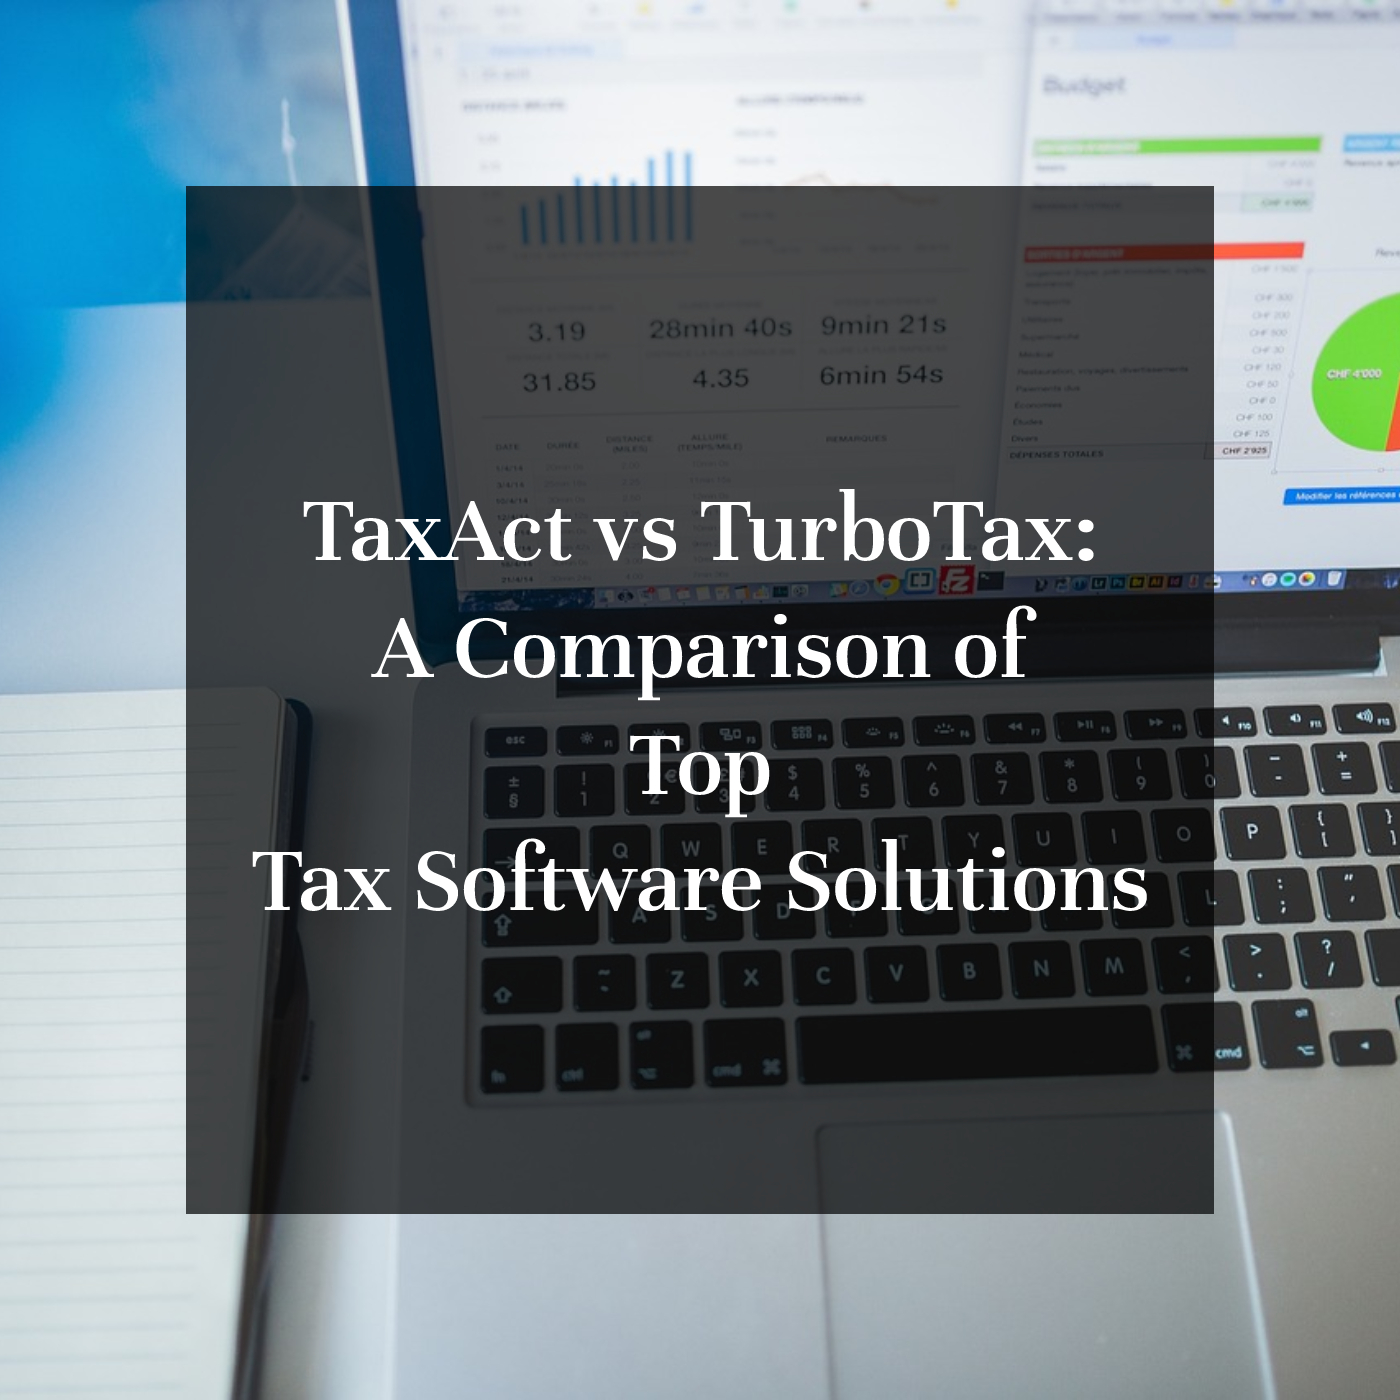 TaxAct vs TurboTax: A Comparison of Top Tax Software Solutions